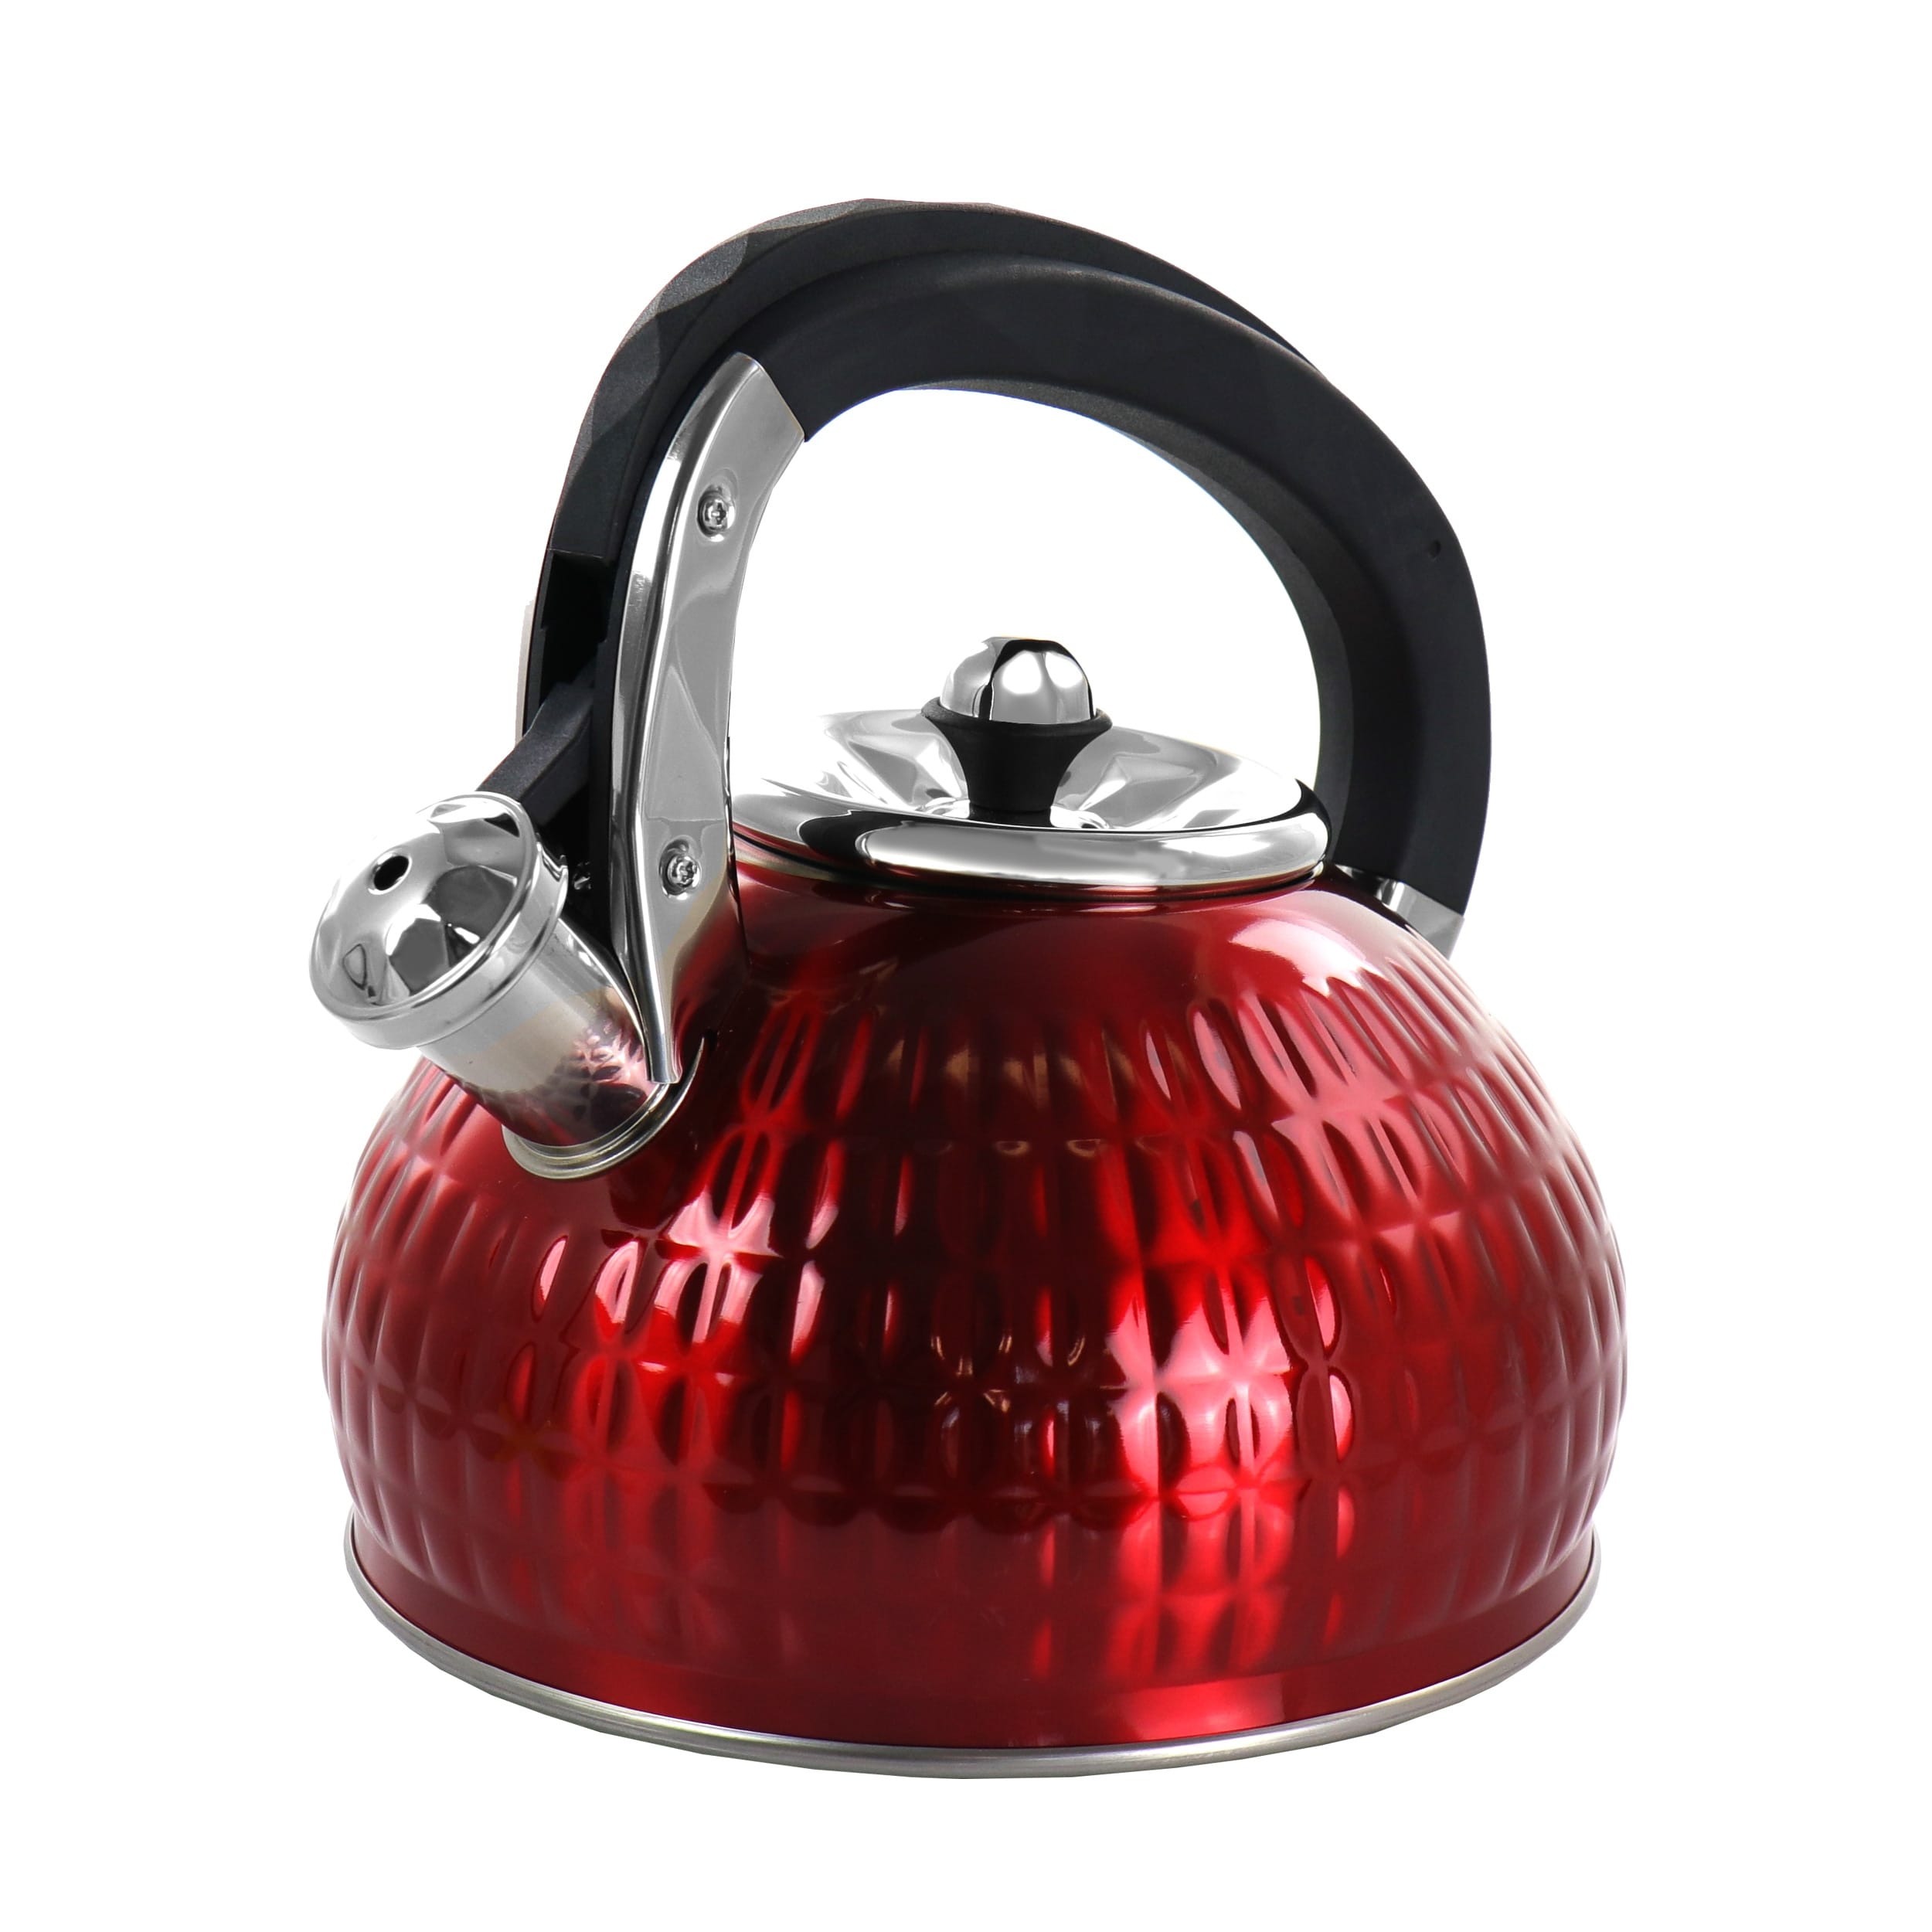 Copco 2.1 Qt Whistling Stainless Steel Tea Kettle, Glossy Red 